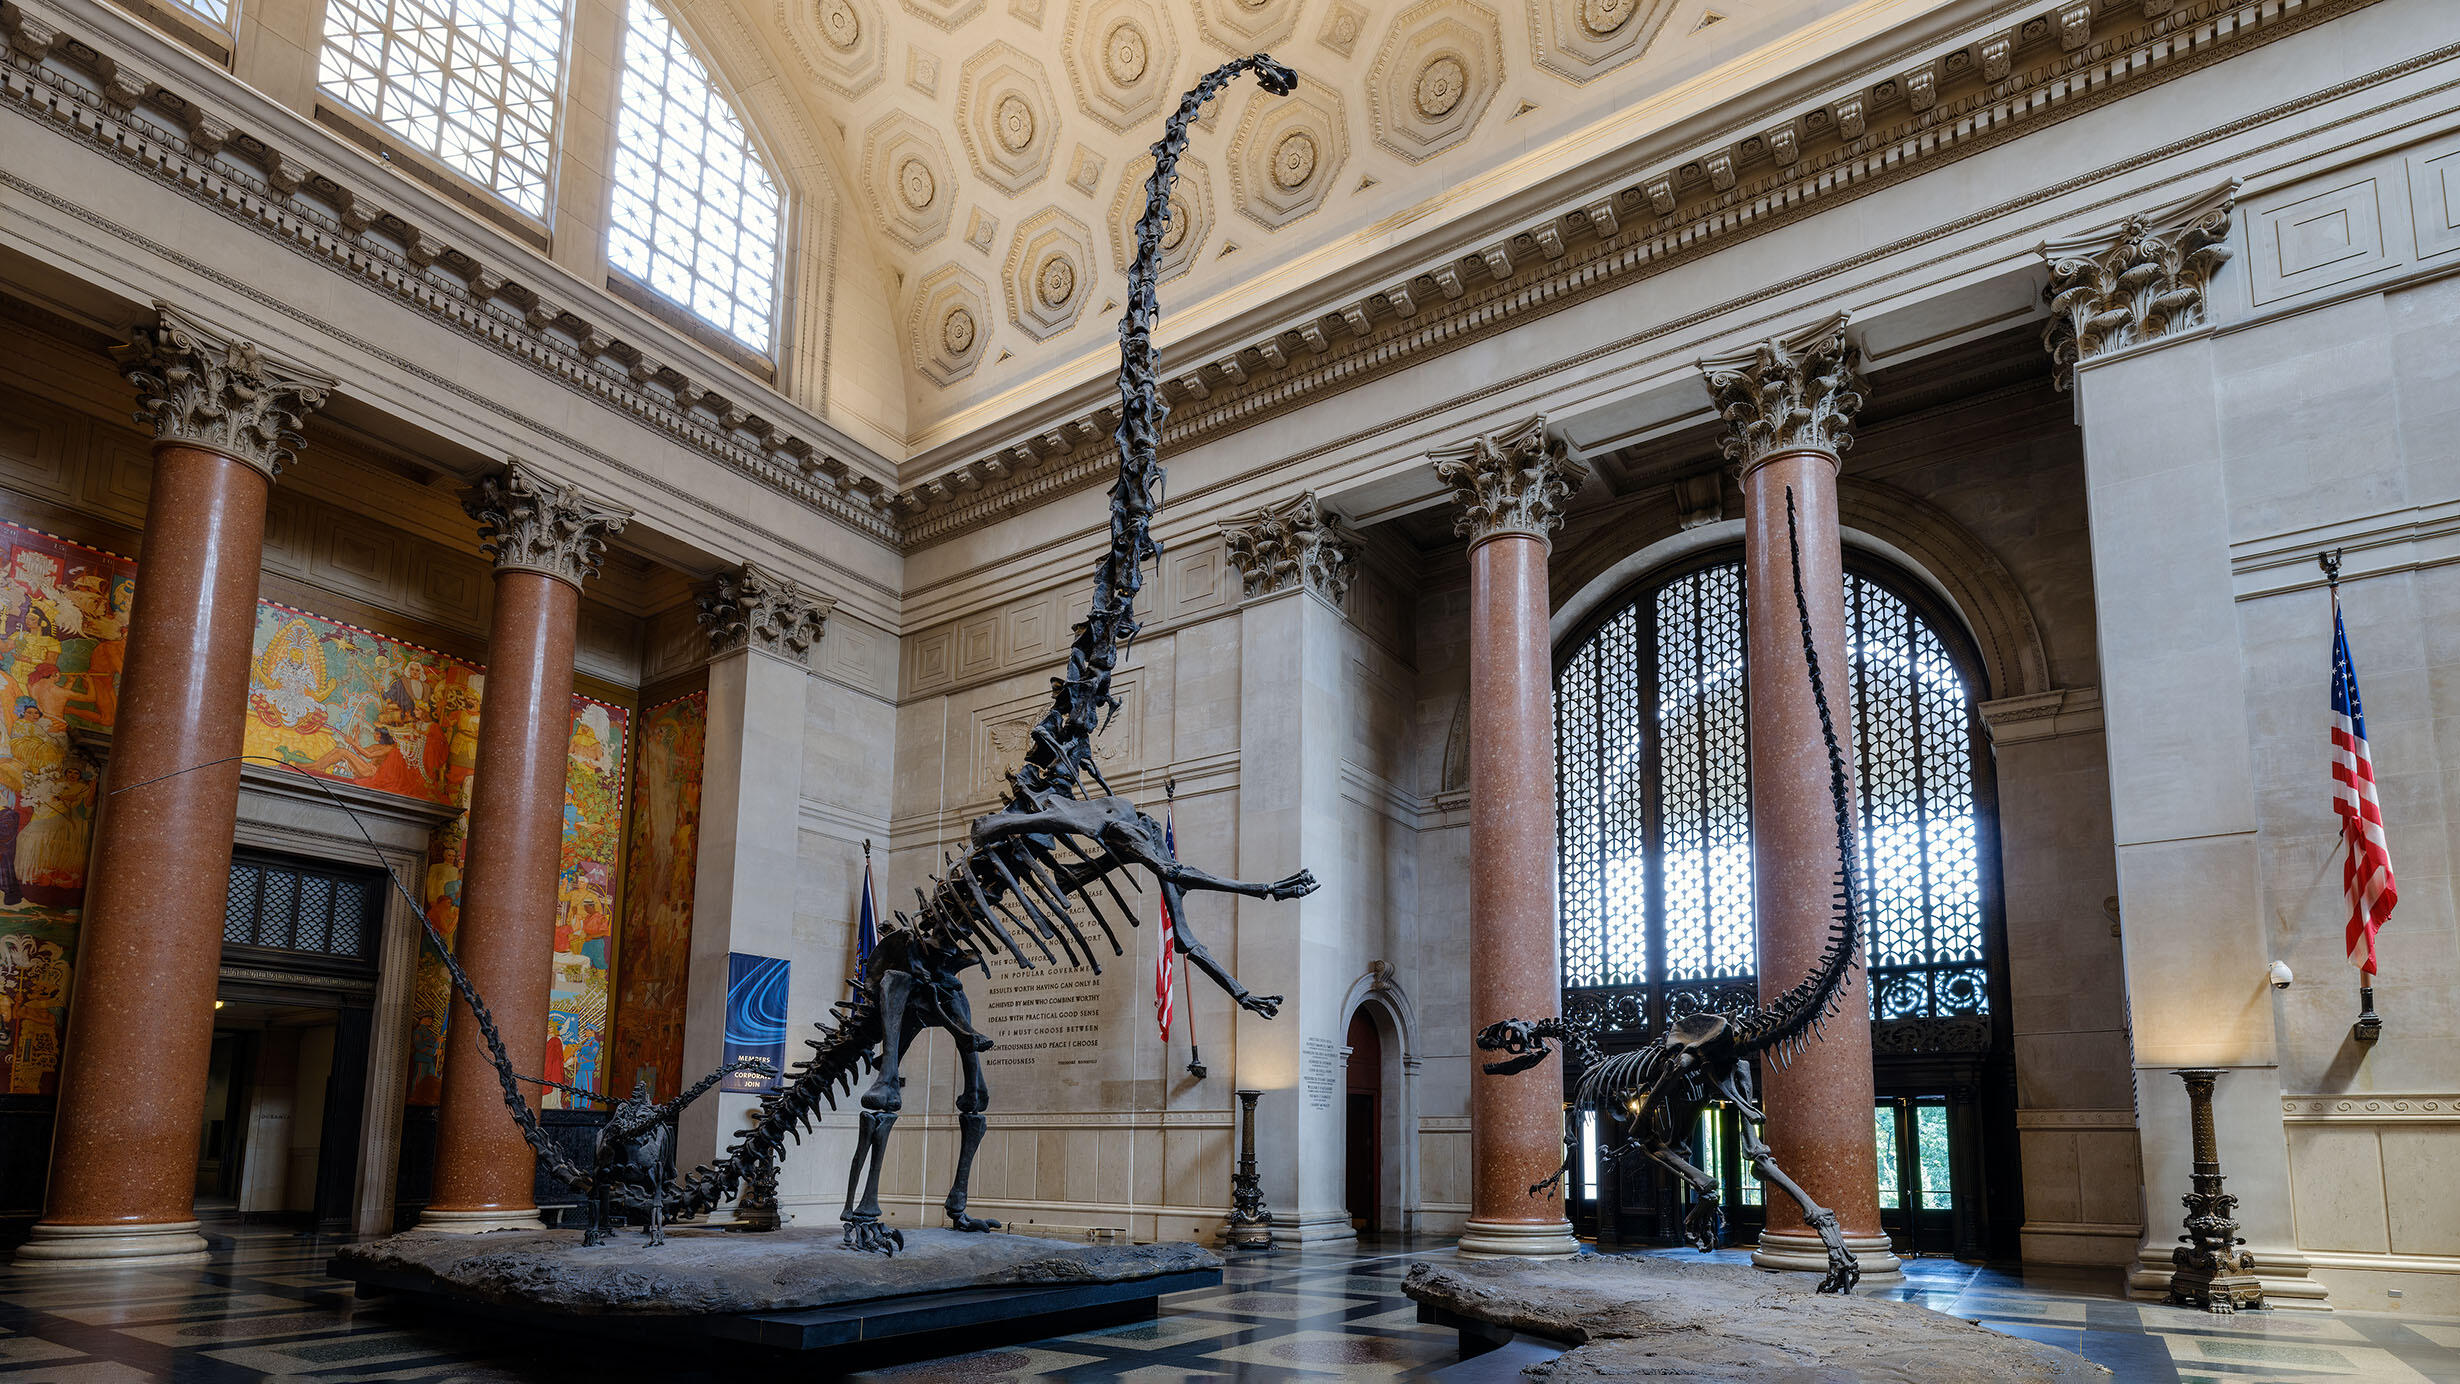 Representation of the fossils of a Barosaurus and Allosaurus fighting, each on a separate platform in the Theodore Roosevelt Memorial Hall.